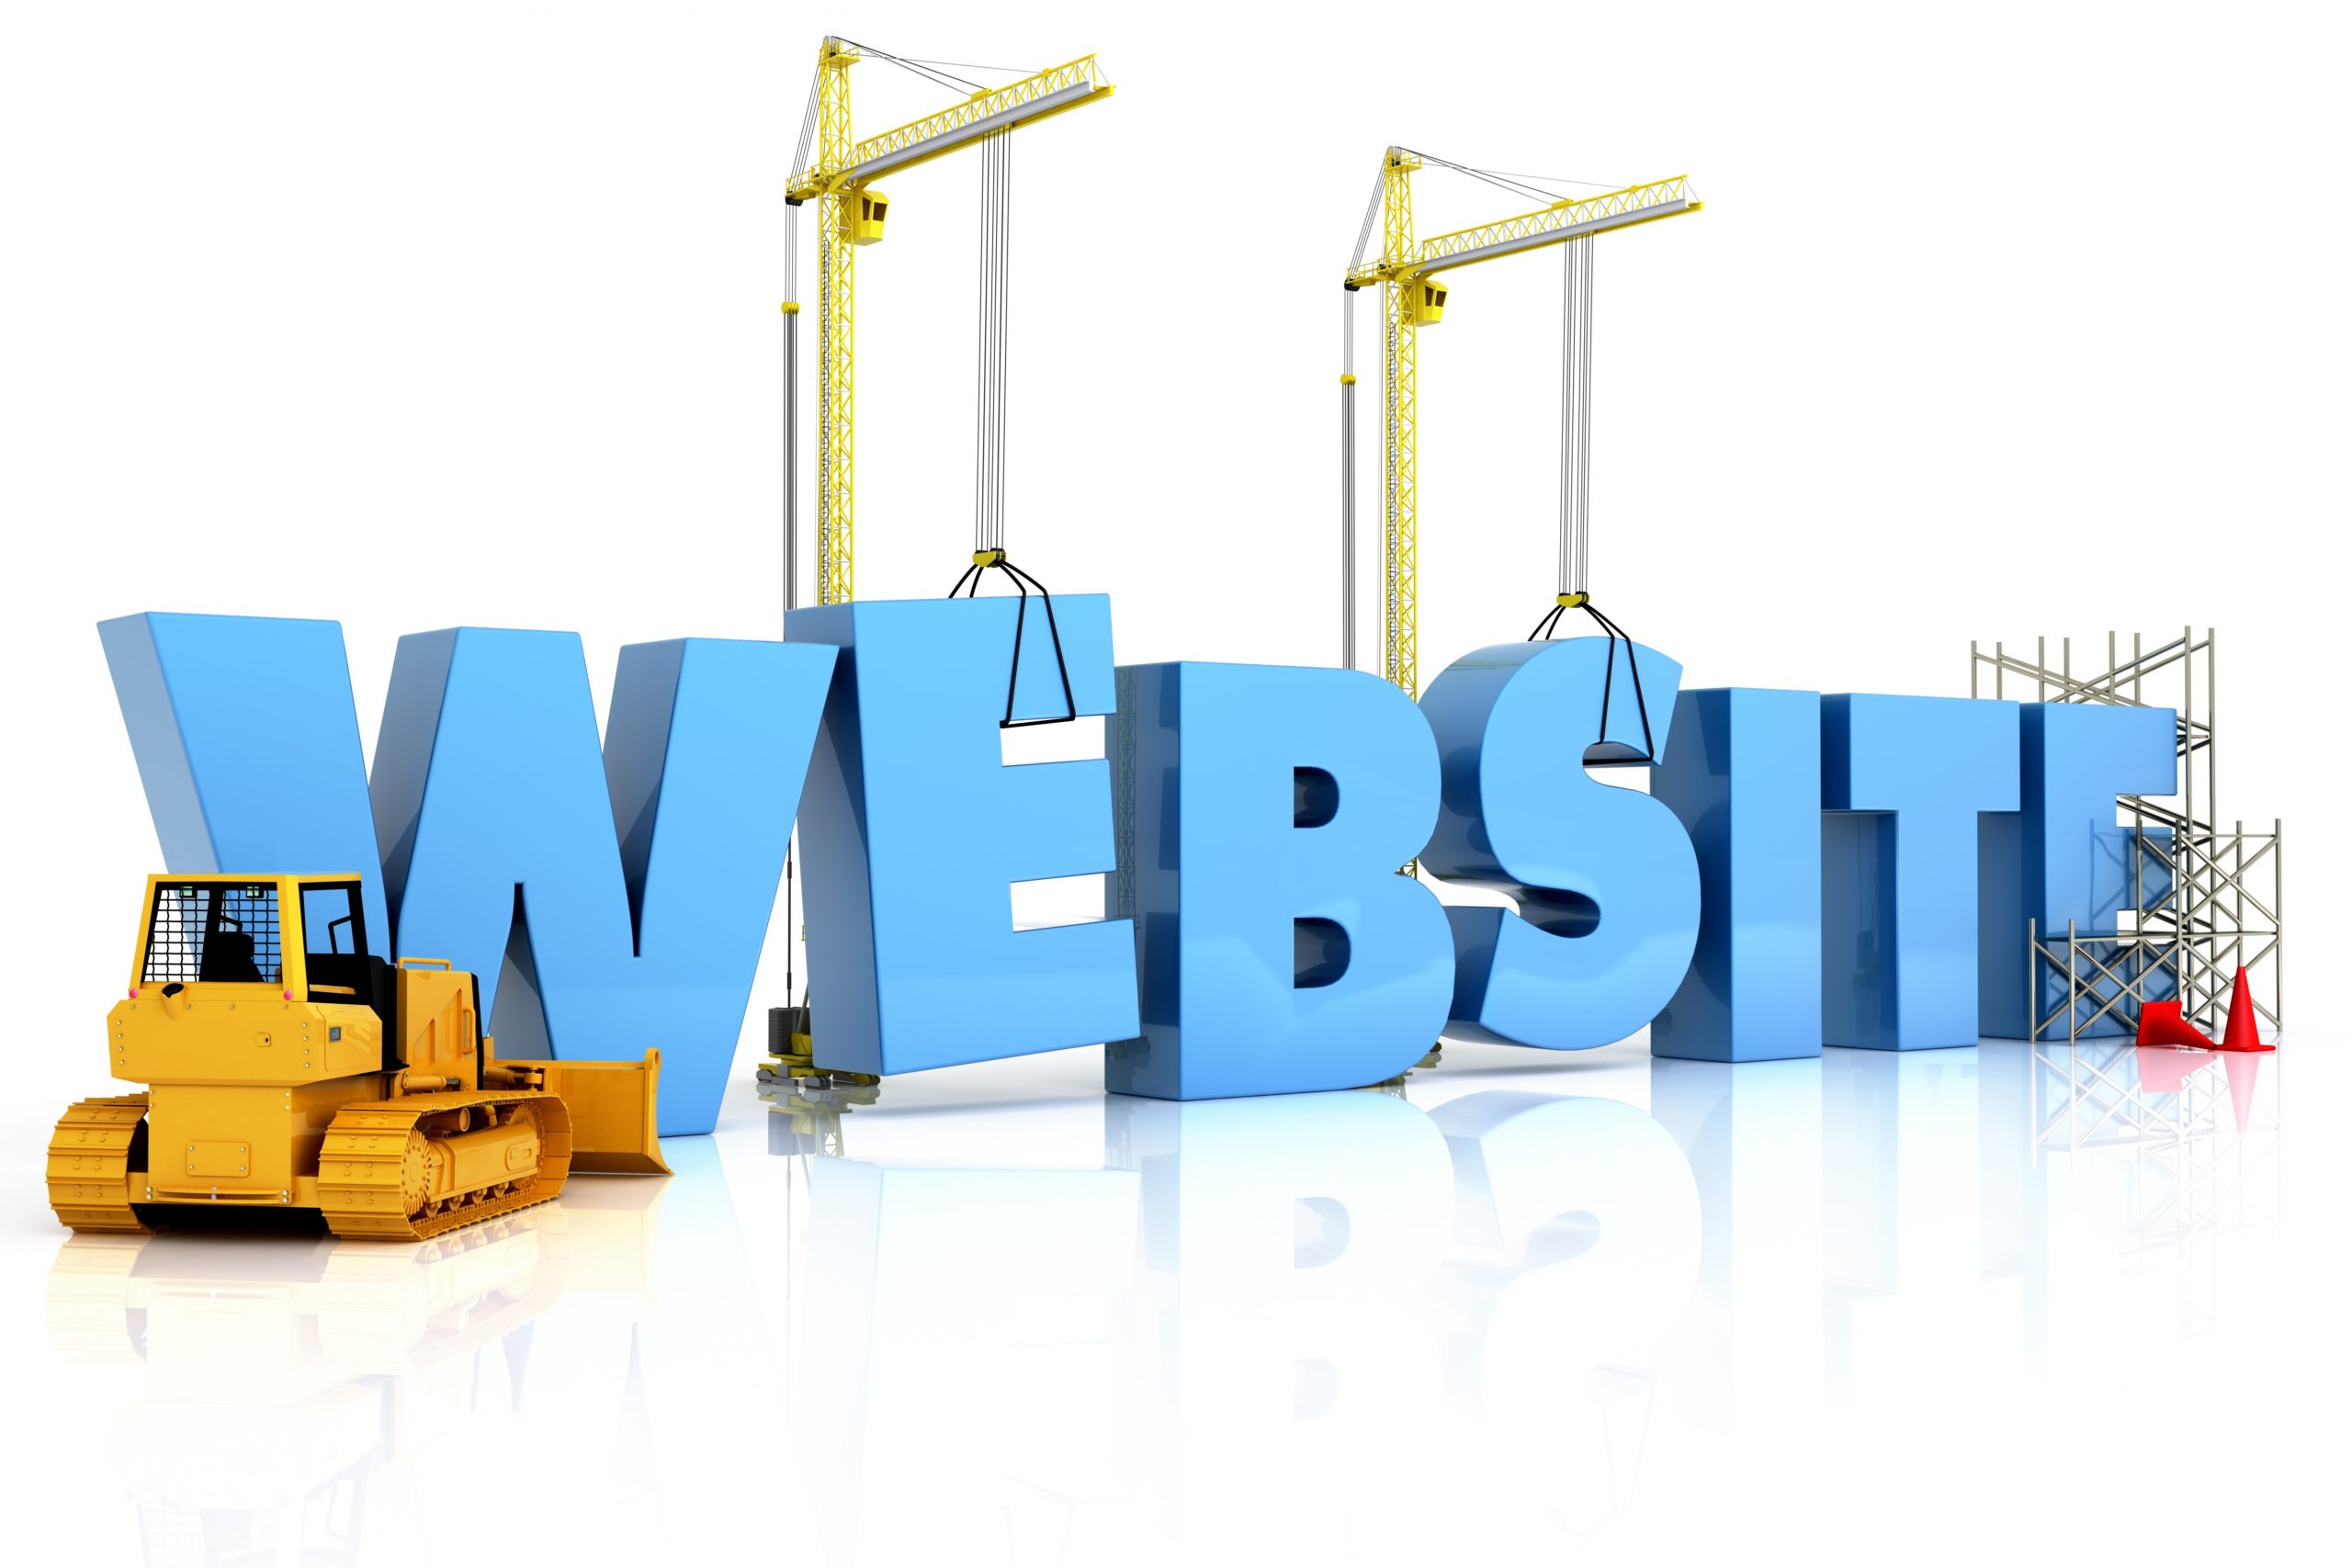 Do You Need Professional Assistance With Your Website Development?